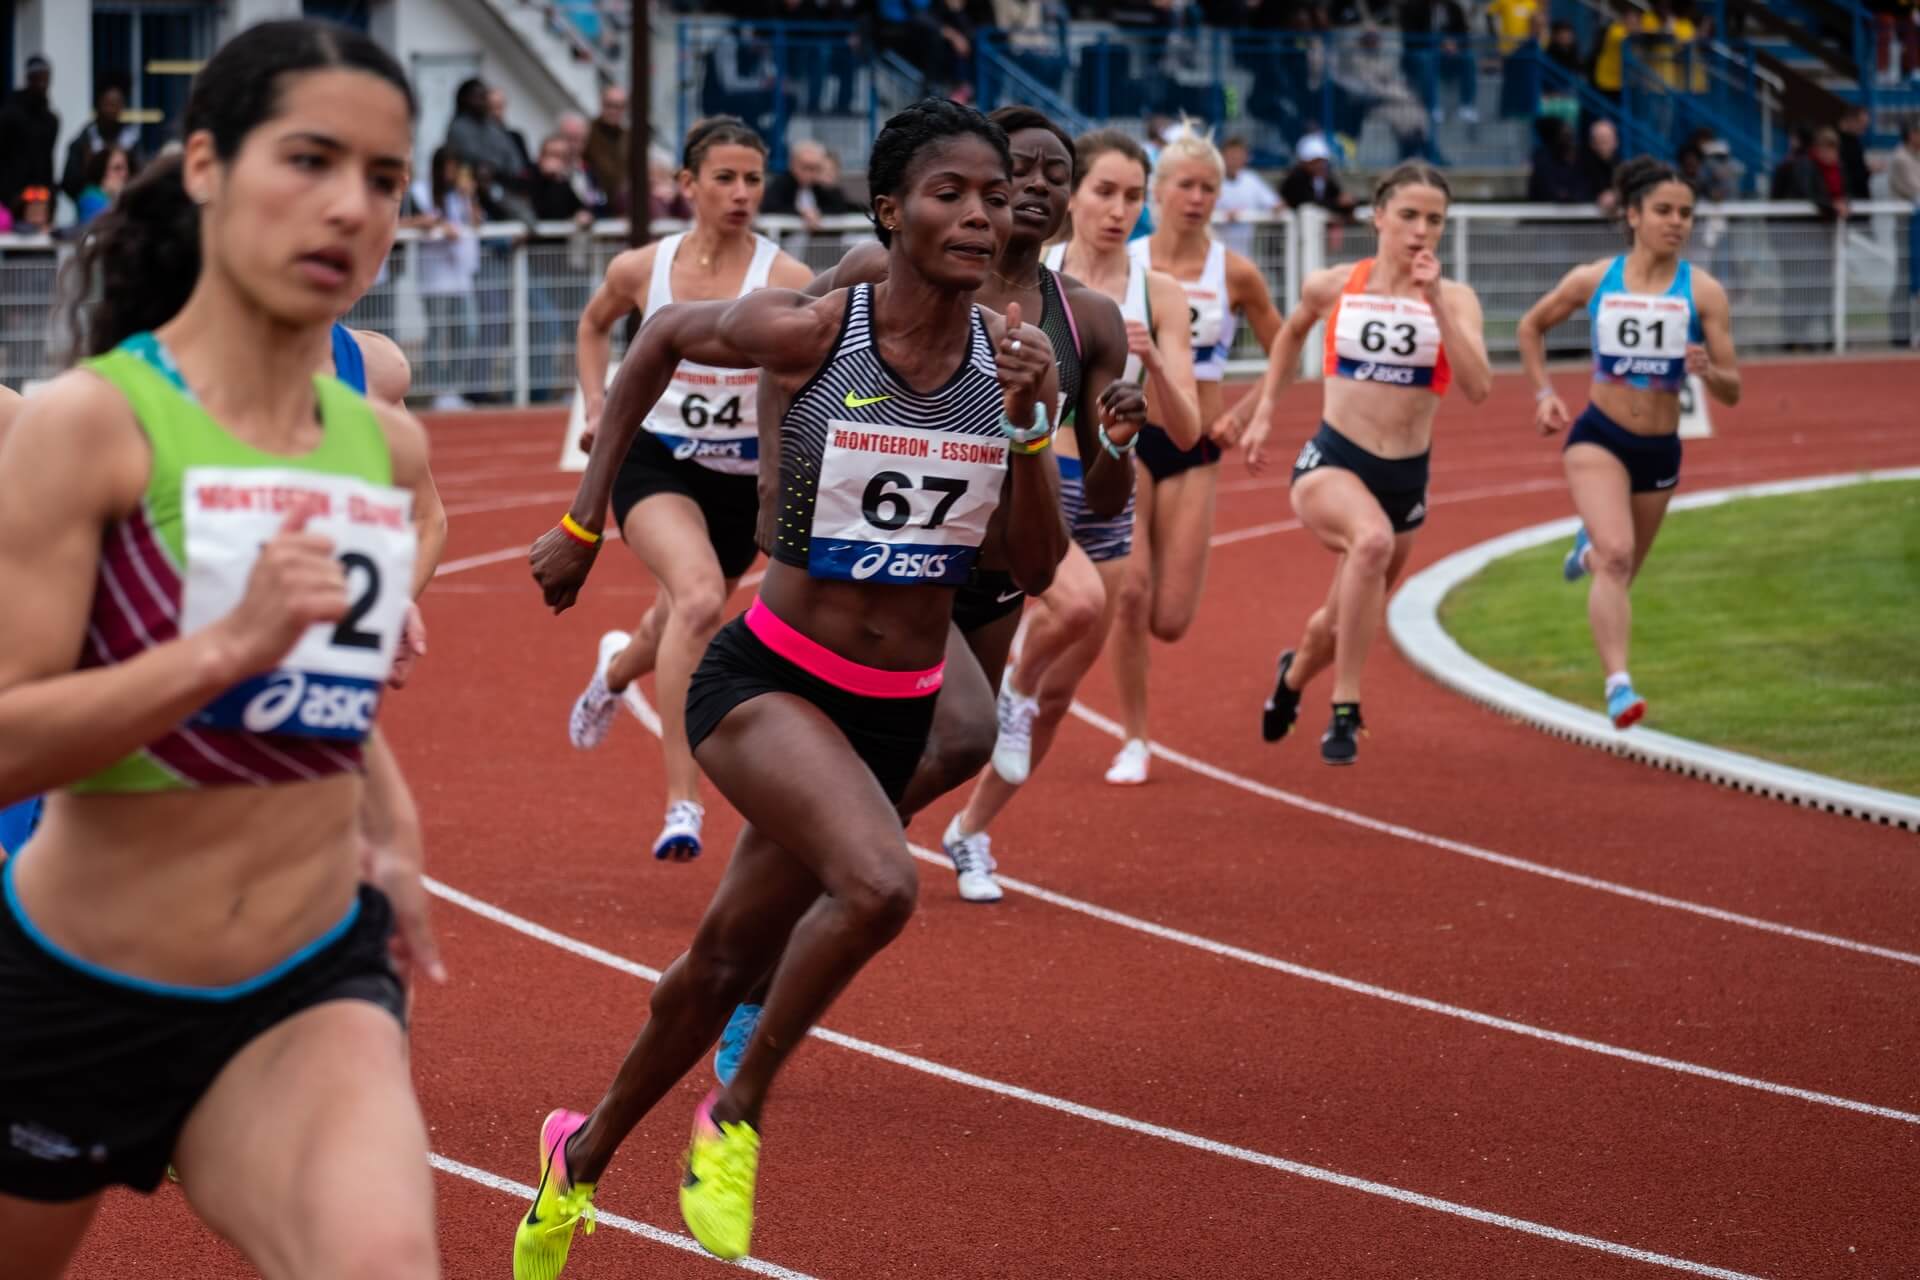 Female runners compete in a race